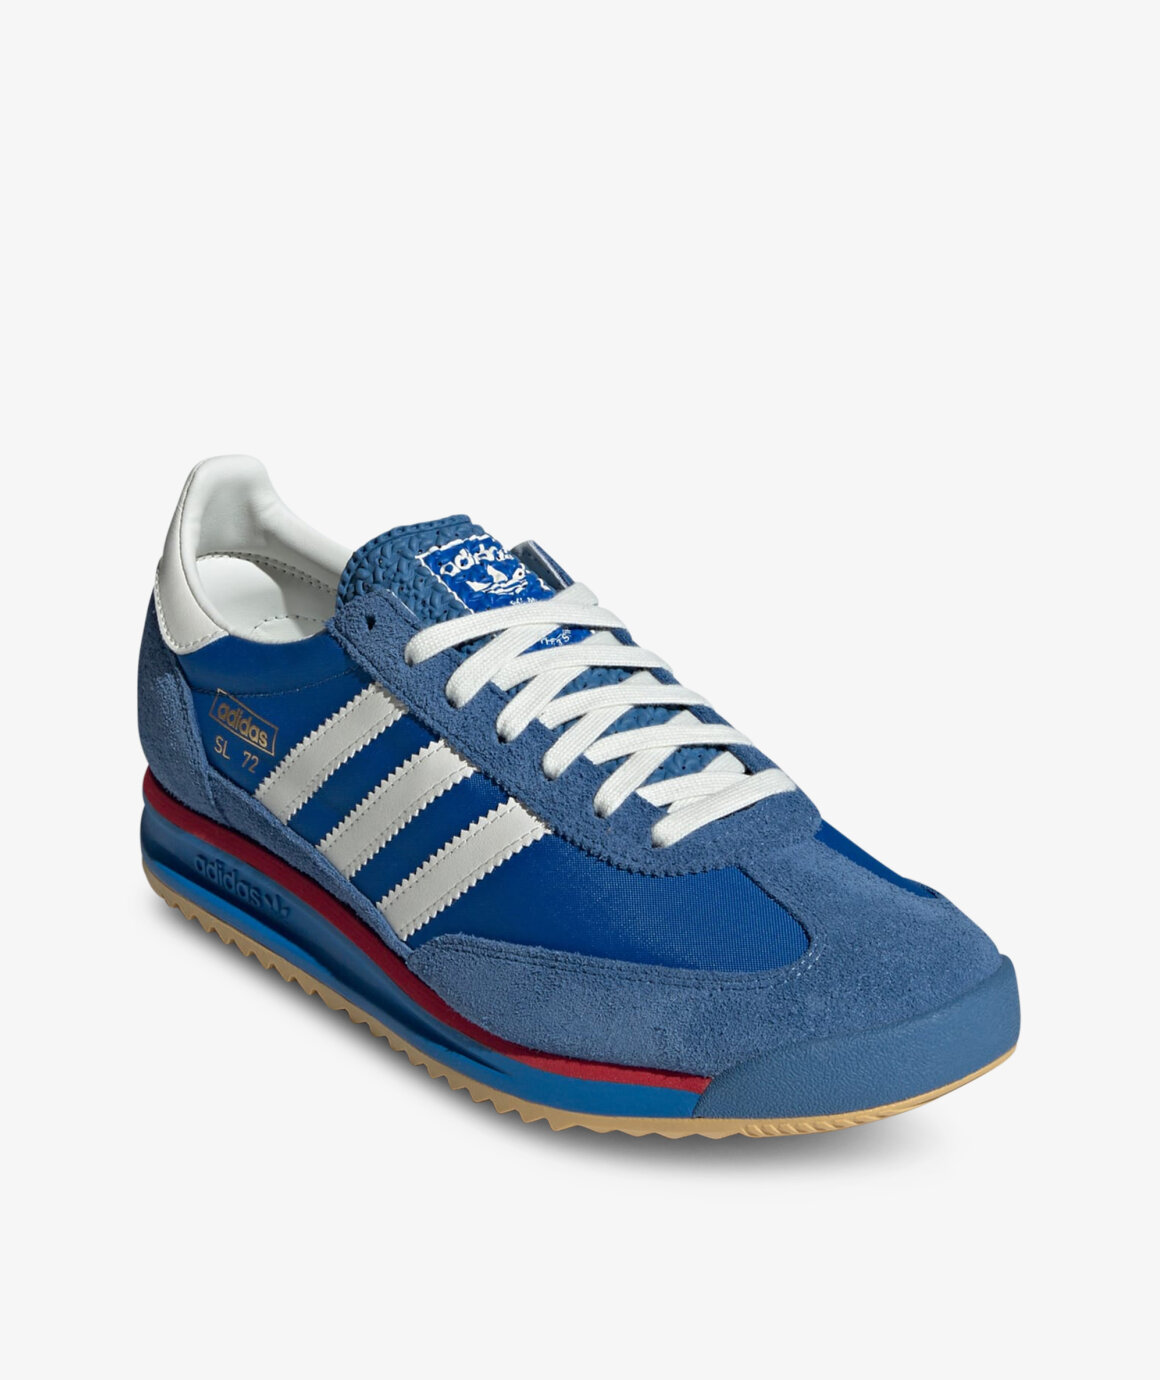 Norse Store | Shipping Worldwide - adidas Originals SL 72 RS - BLUE/CWHITE/